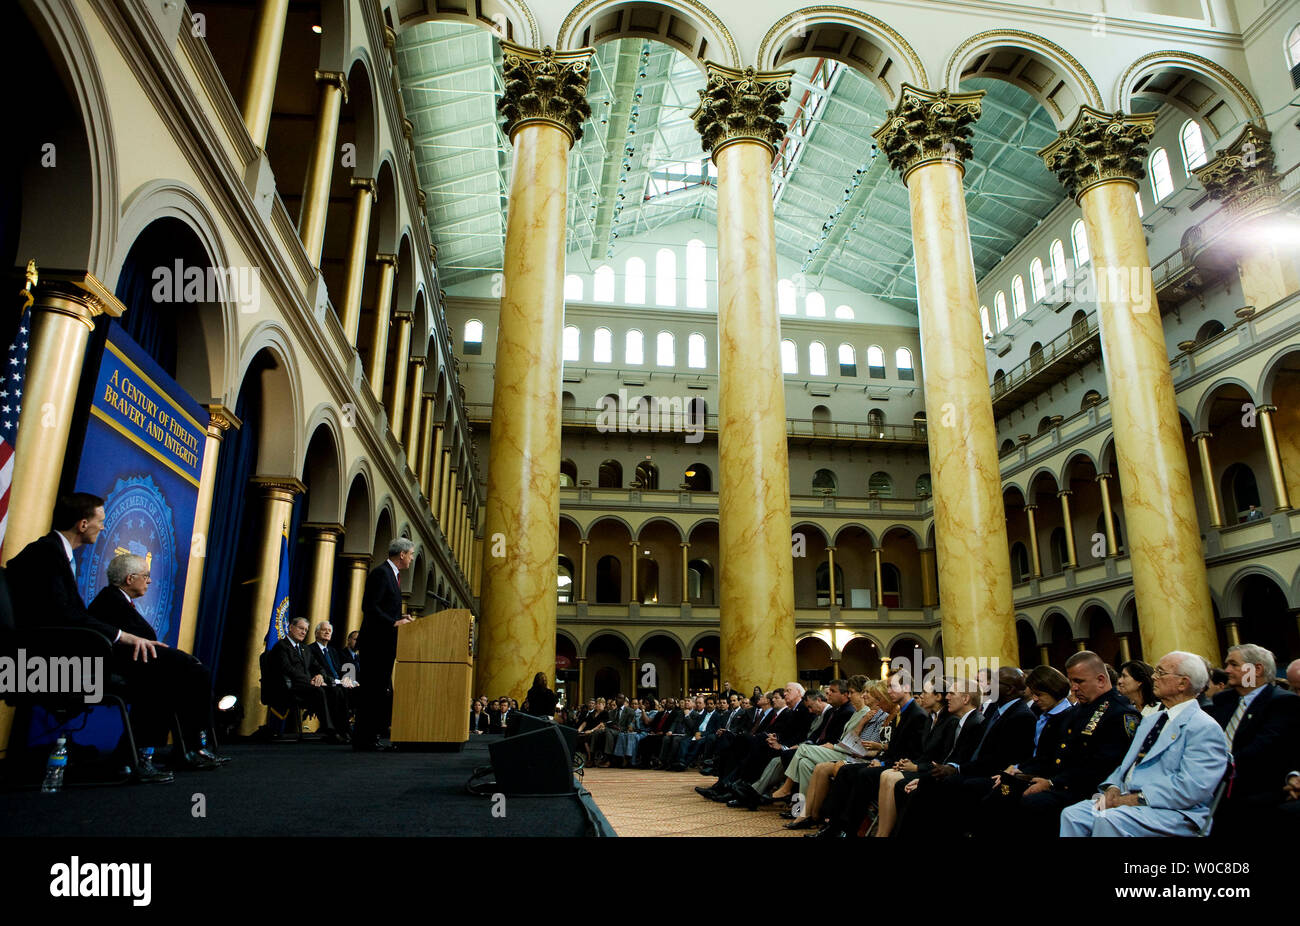 Federal Bureau of Investigation Director Robert Mueller III speaks during an event at the National Building Museum to commemorate the Federal Bureau of Investigation's 100th Anniversary in Washington on July 17, 2008. (UPI Photo/Patrick D. McDermott) Stock Photo